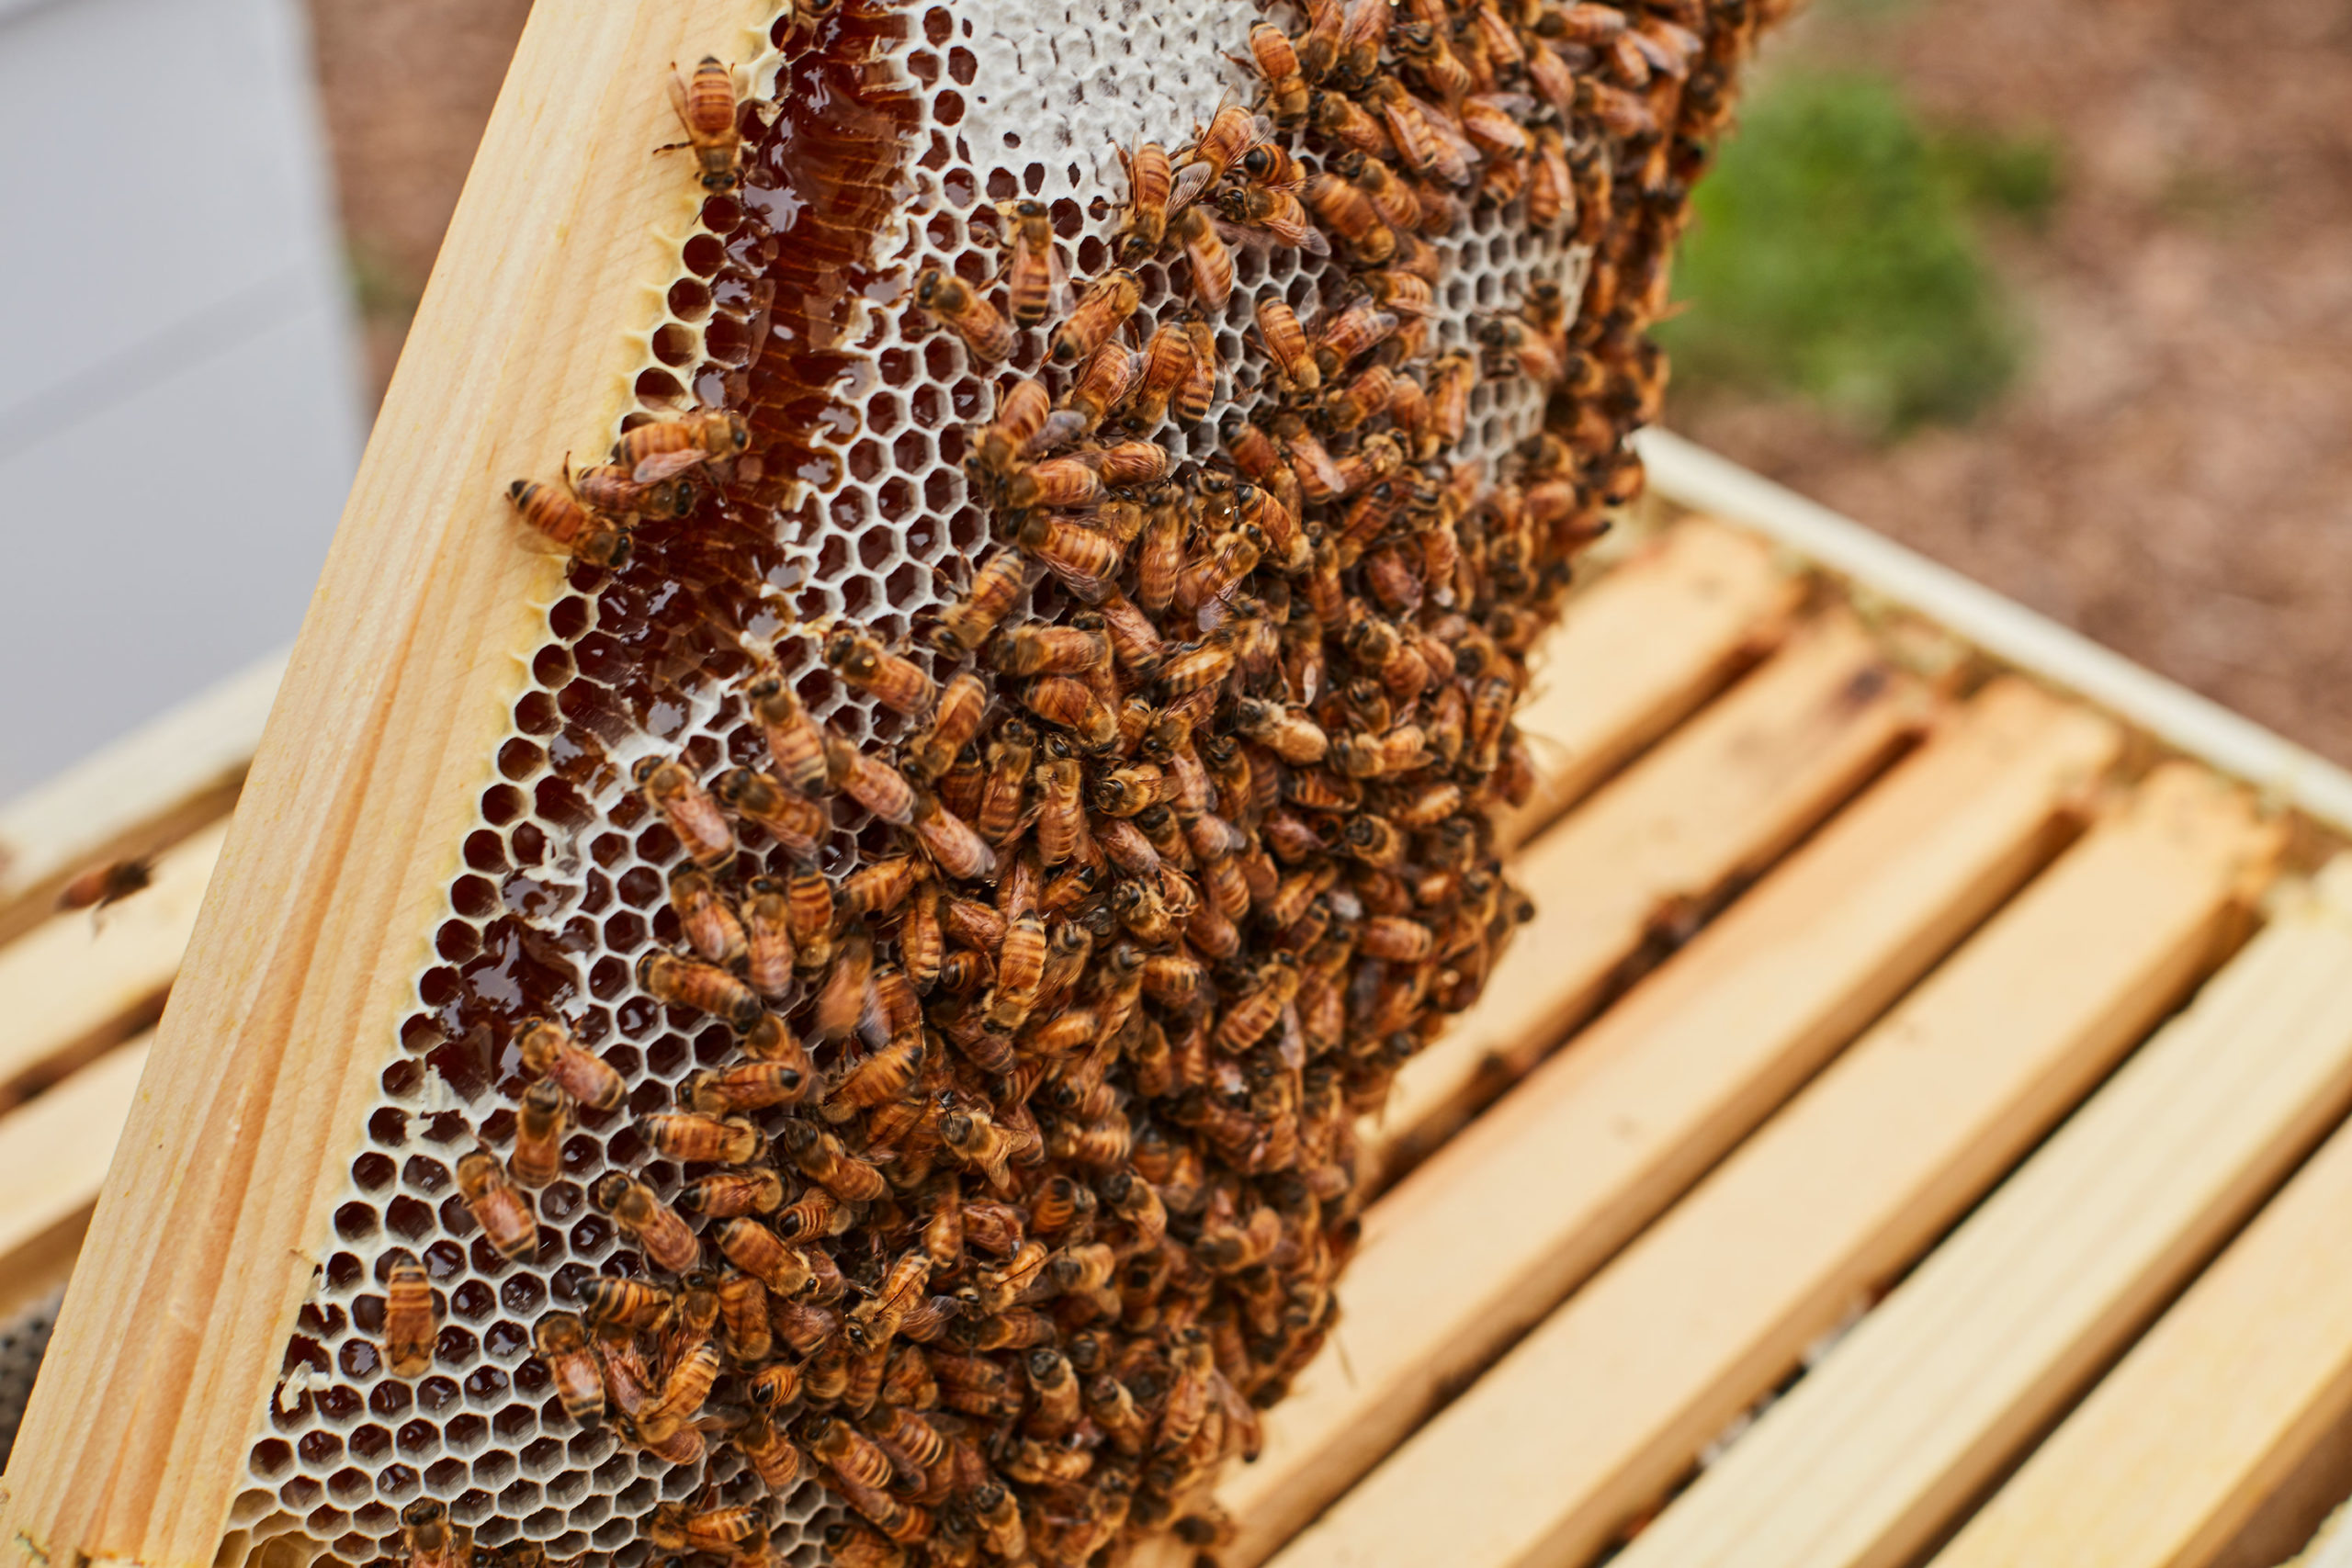 Bees on a beehive frame